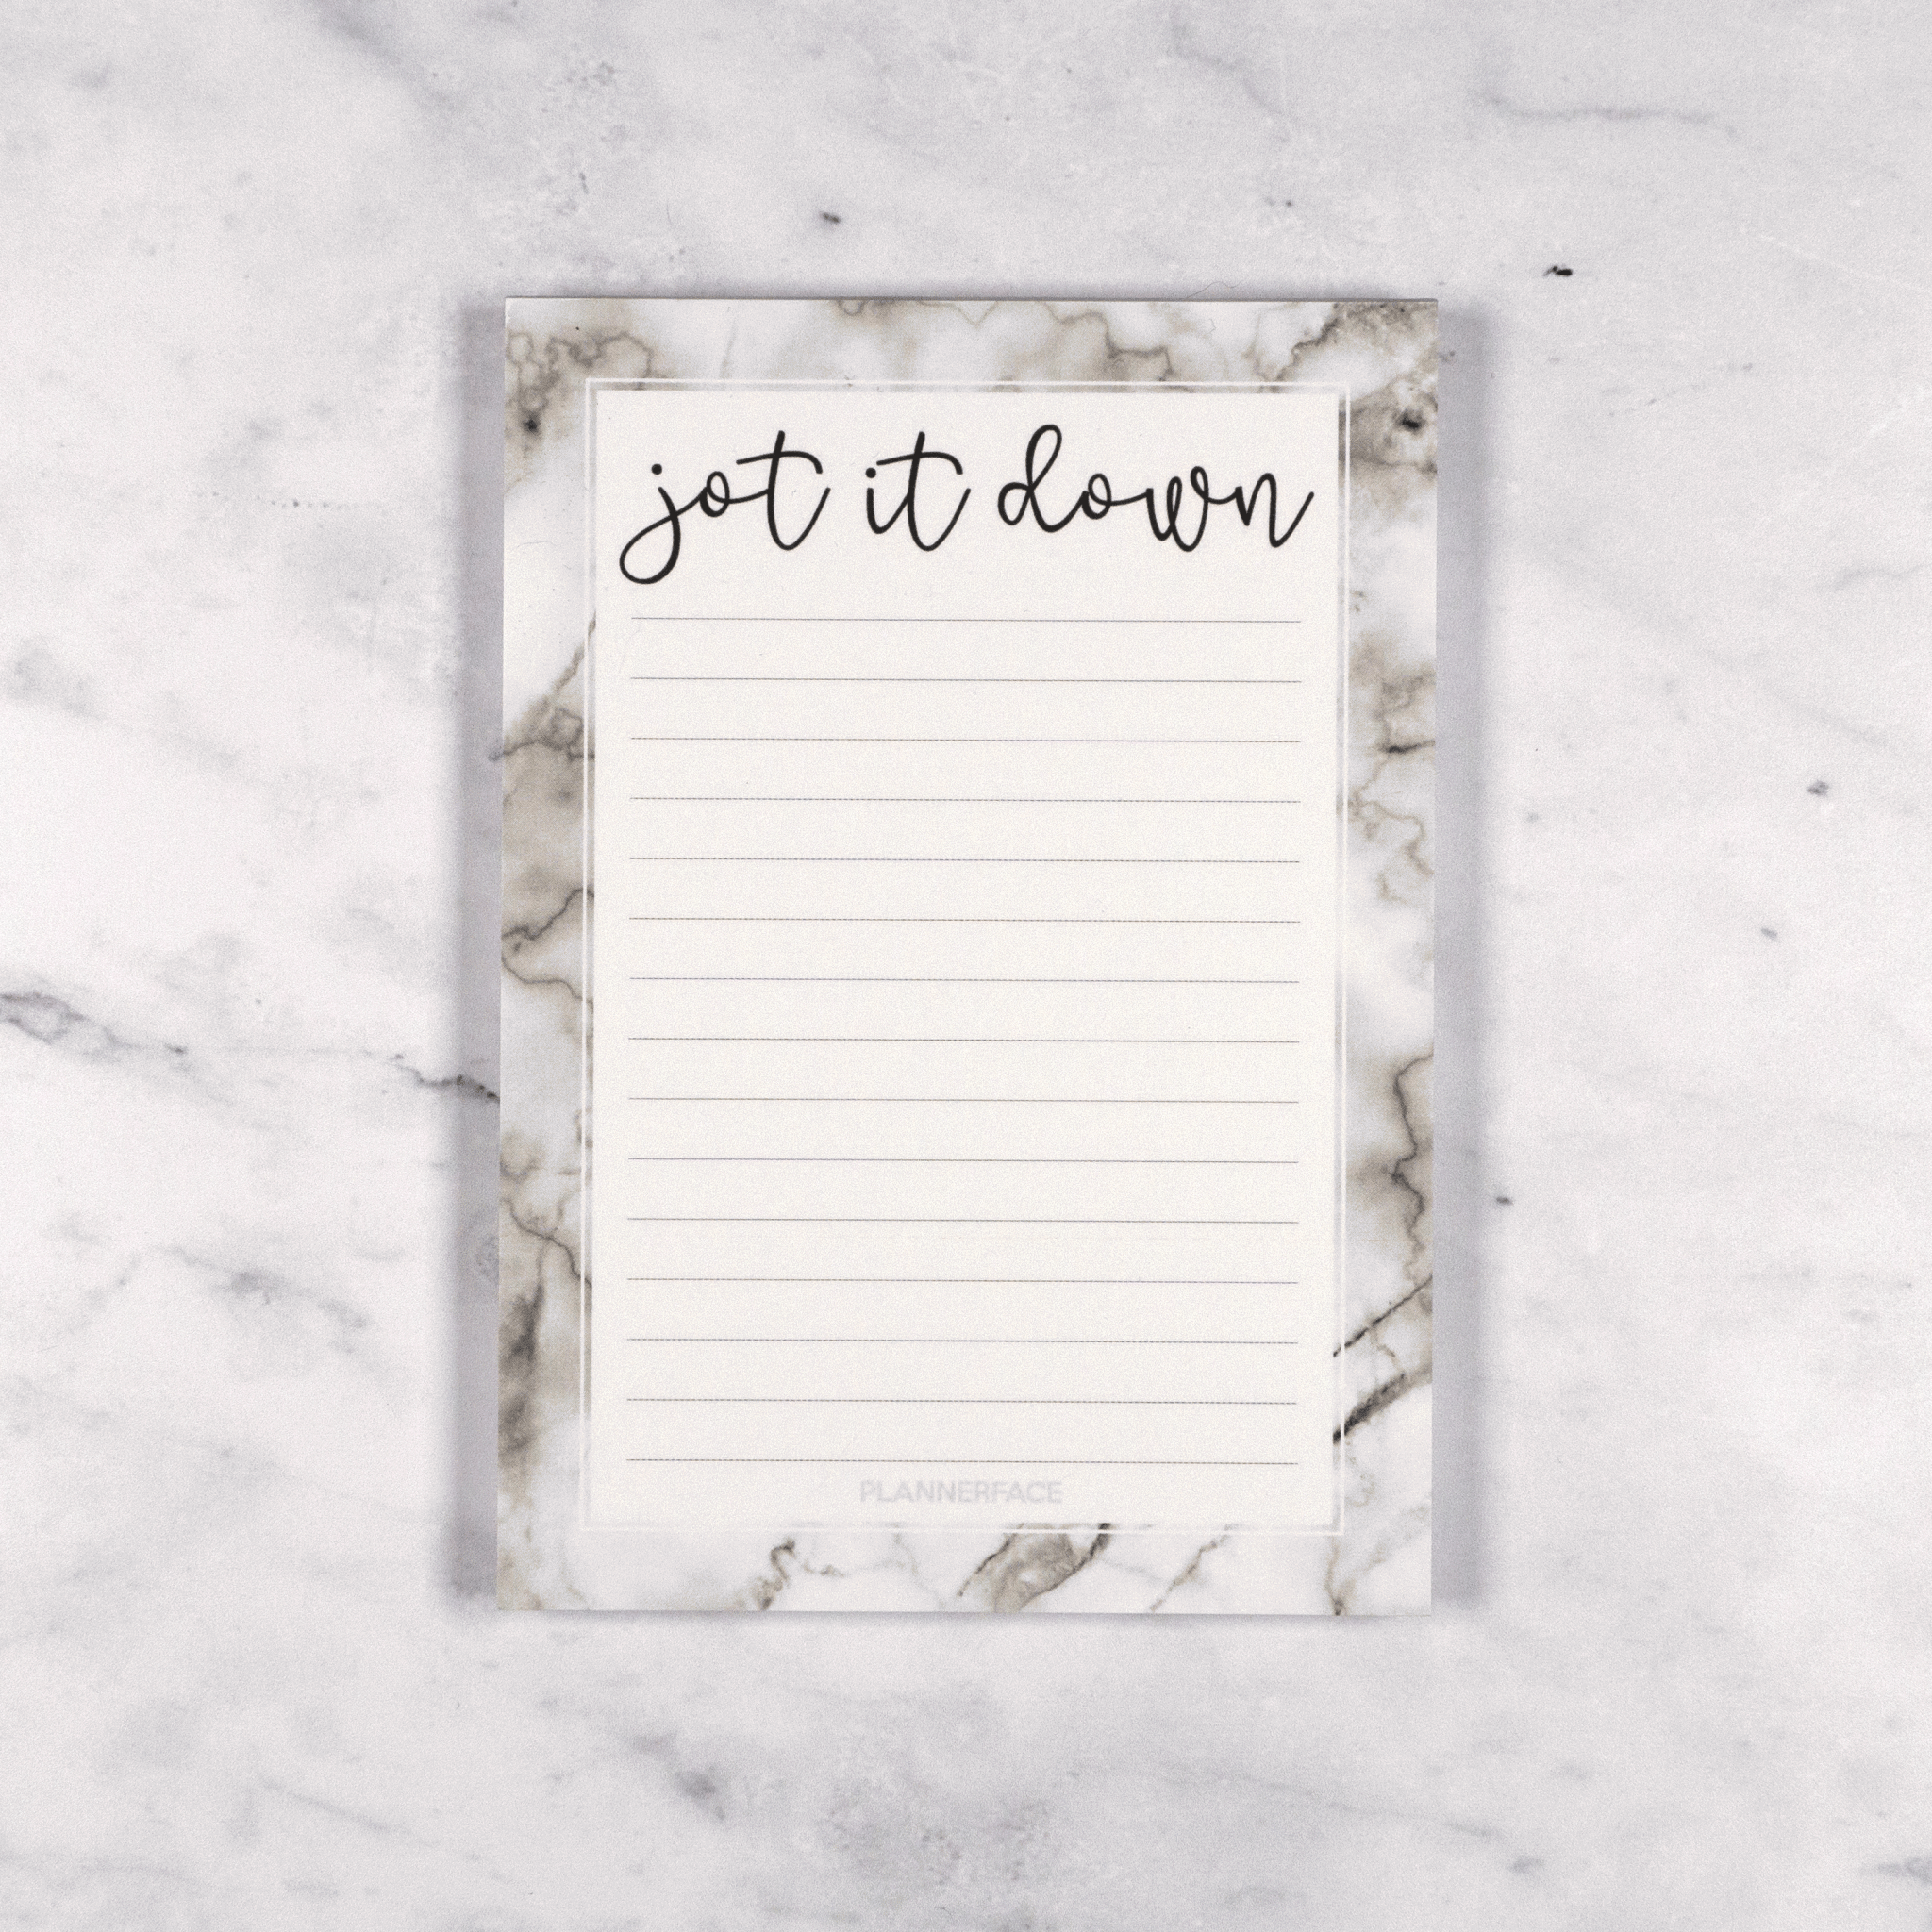 A6 Marble Notepad - Jot It Down by Plannerface